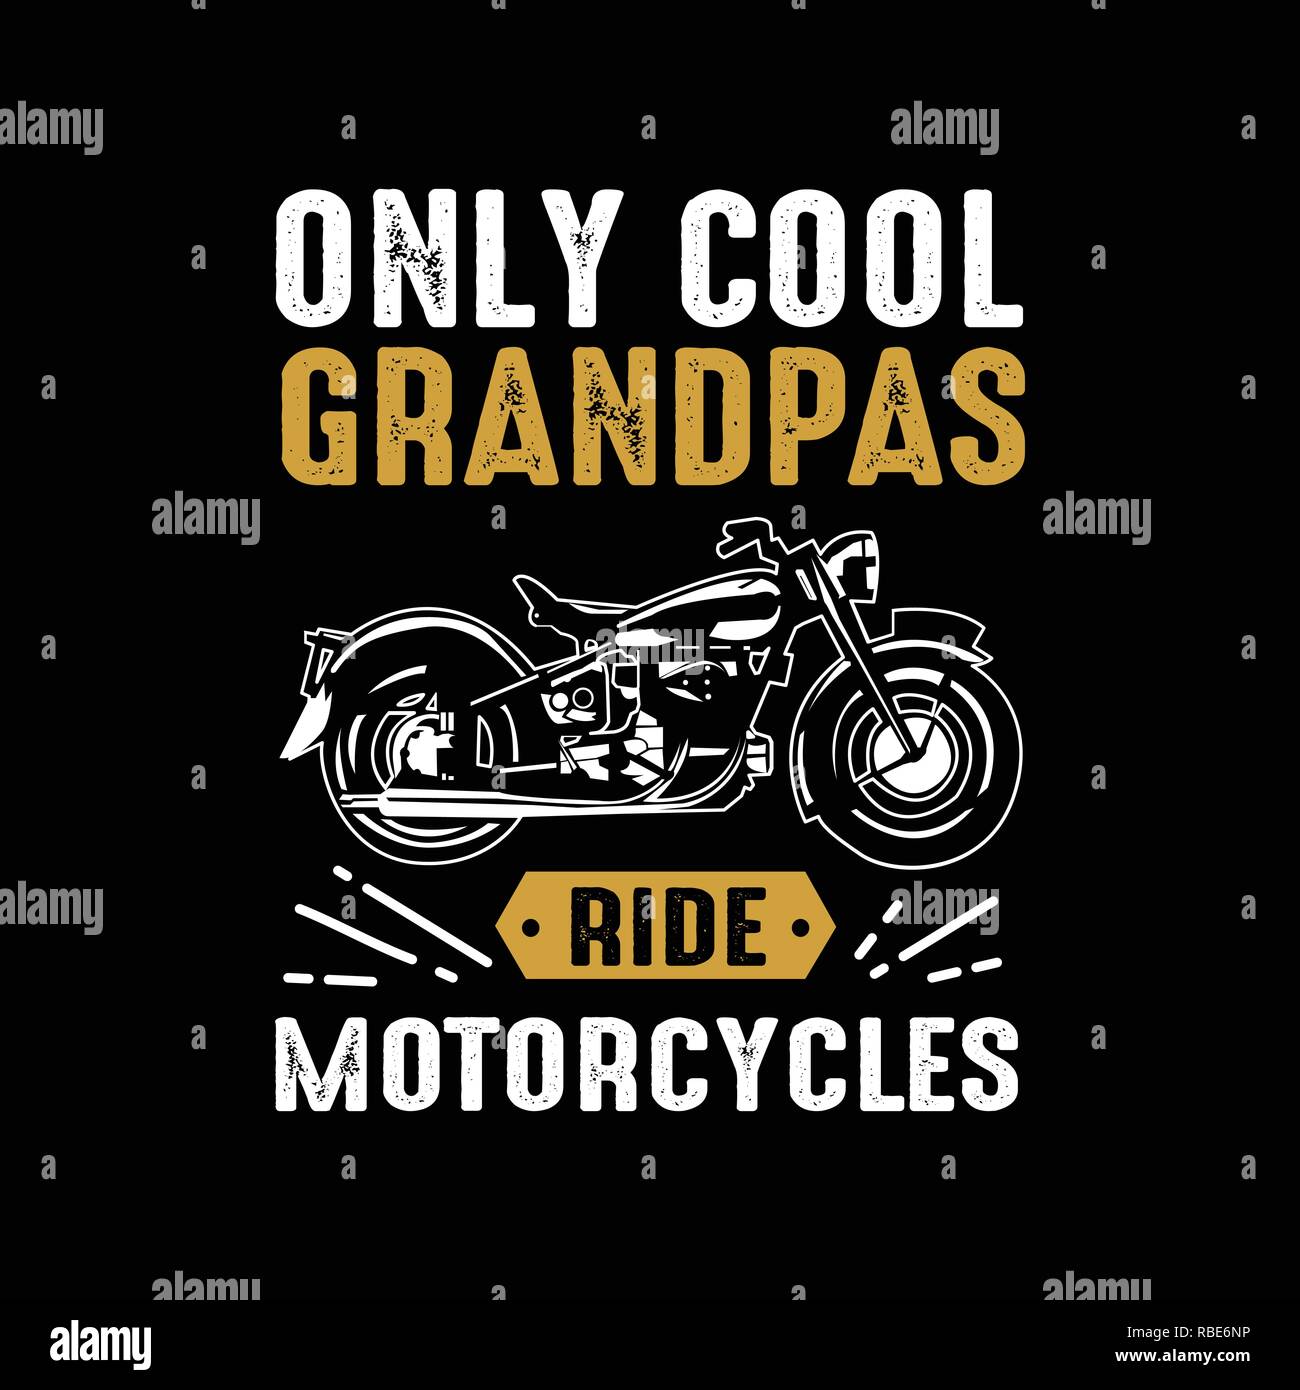 Motorcycle quote and saying. Only cool grandpas ride motorcycles Stock Vector